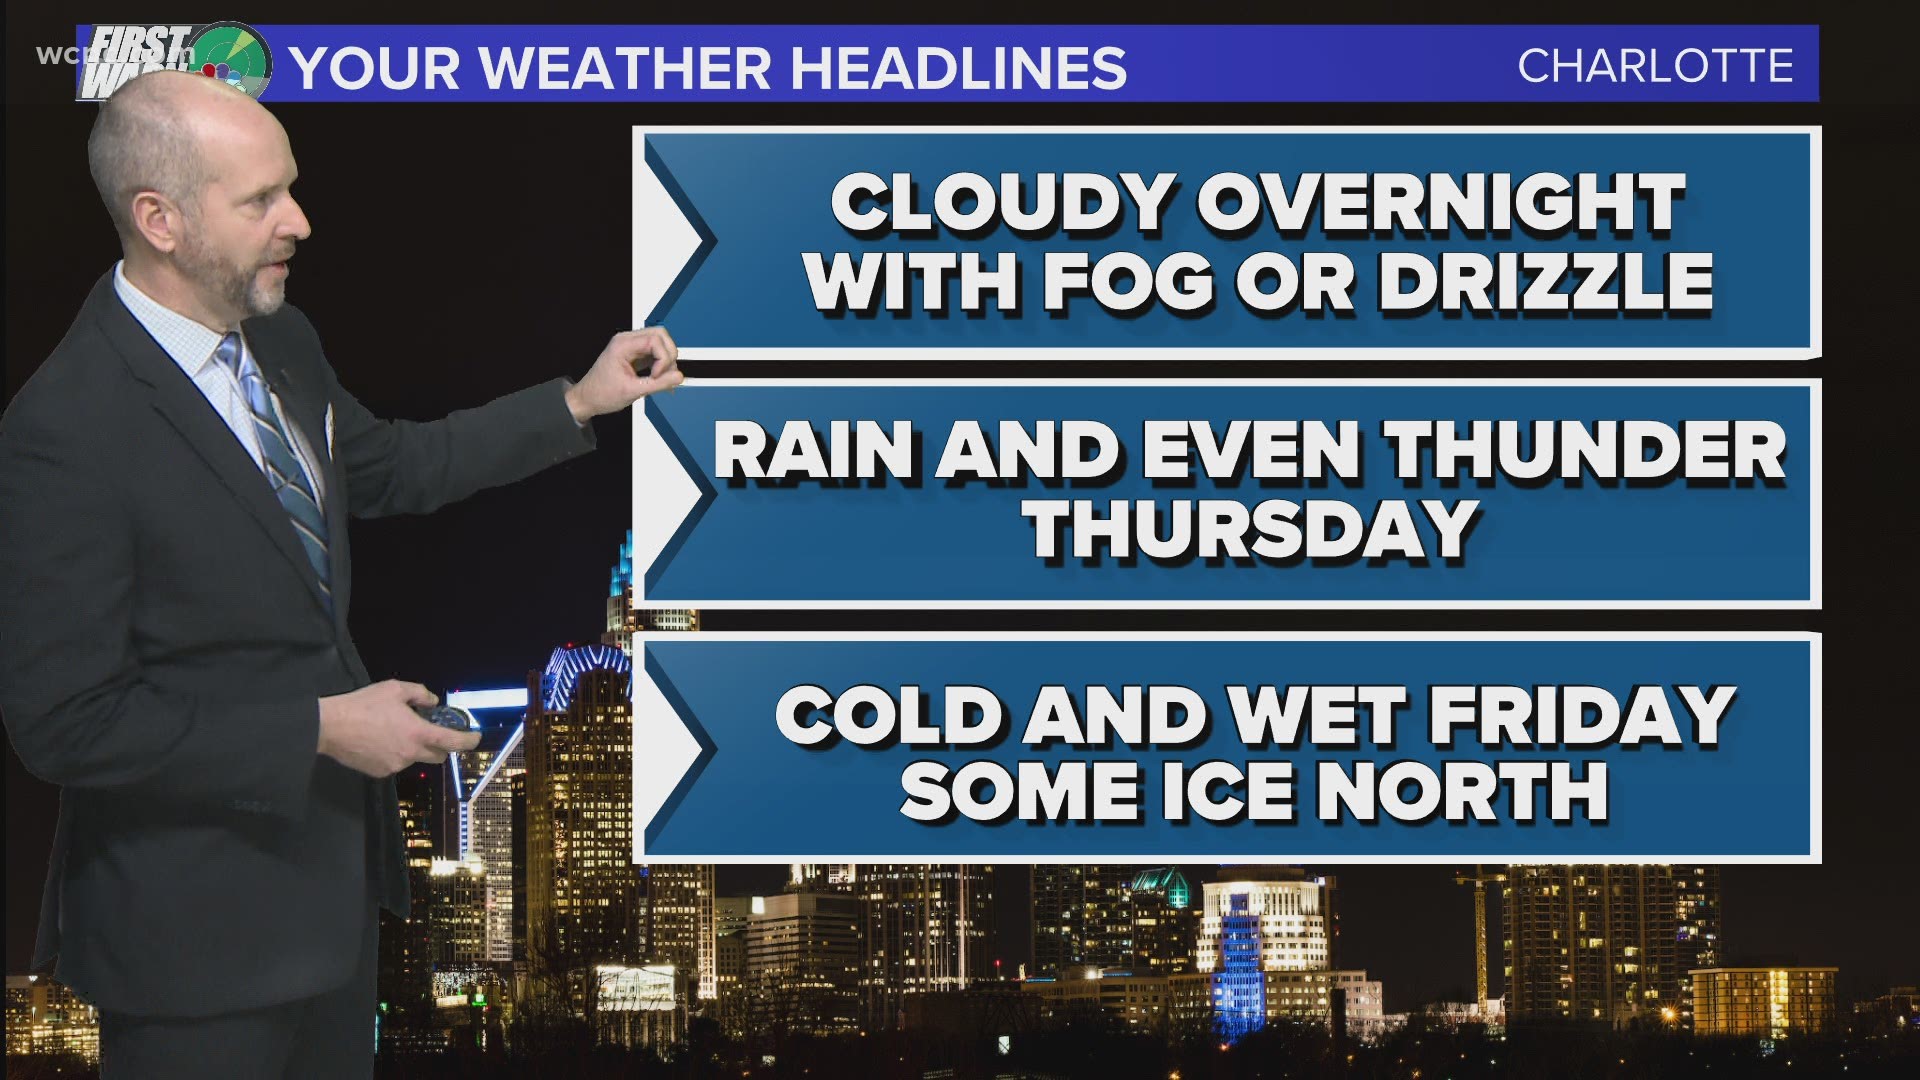 Chief Meteorologist Brad Panovich has the latest weather forecast for the Carolinas.